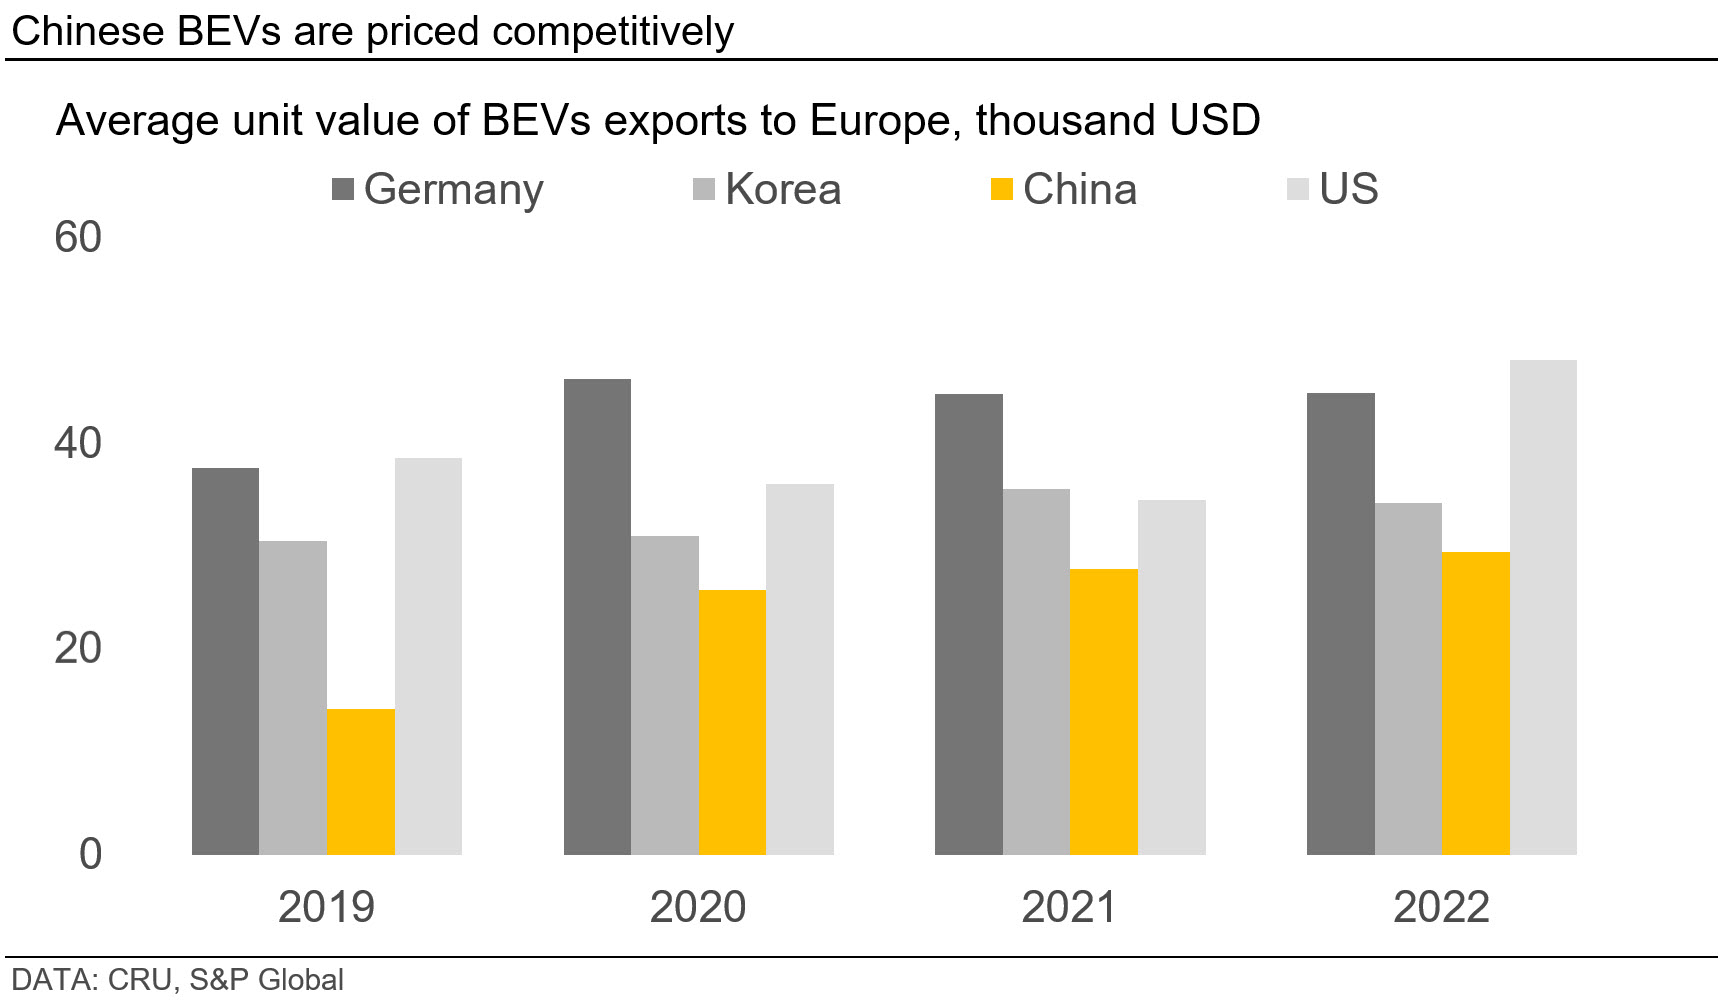 Data on Germany, Korea, China, and the US (Chinese cars are priced competitively)